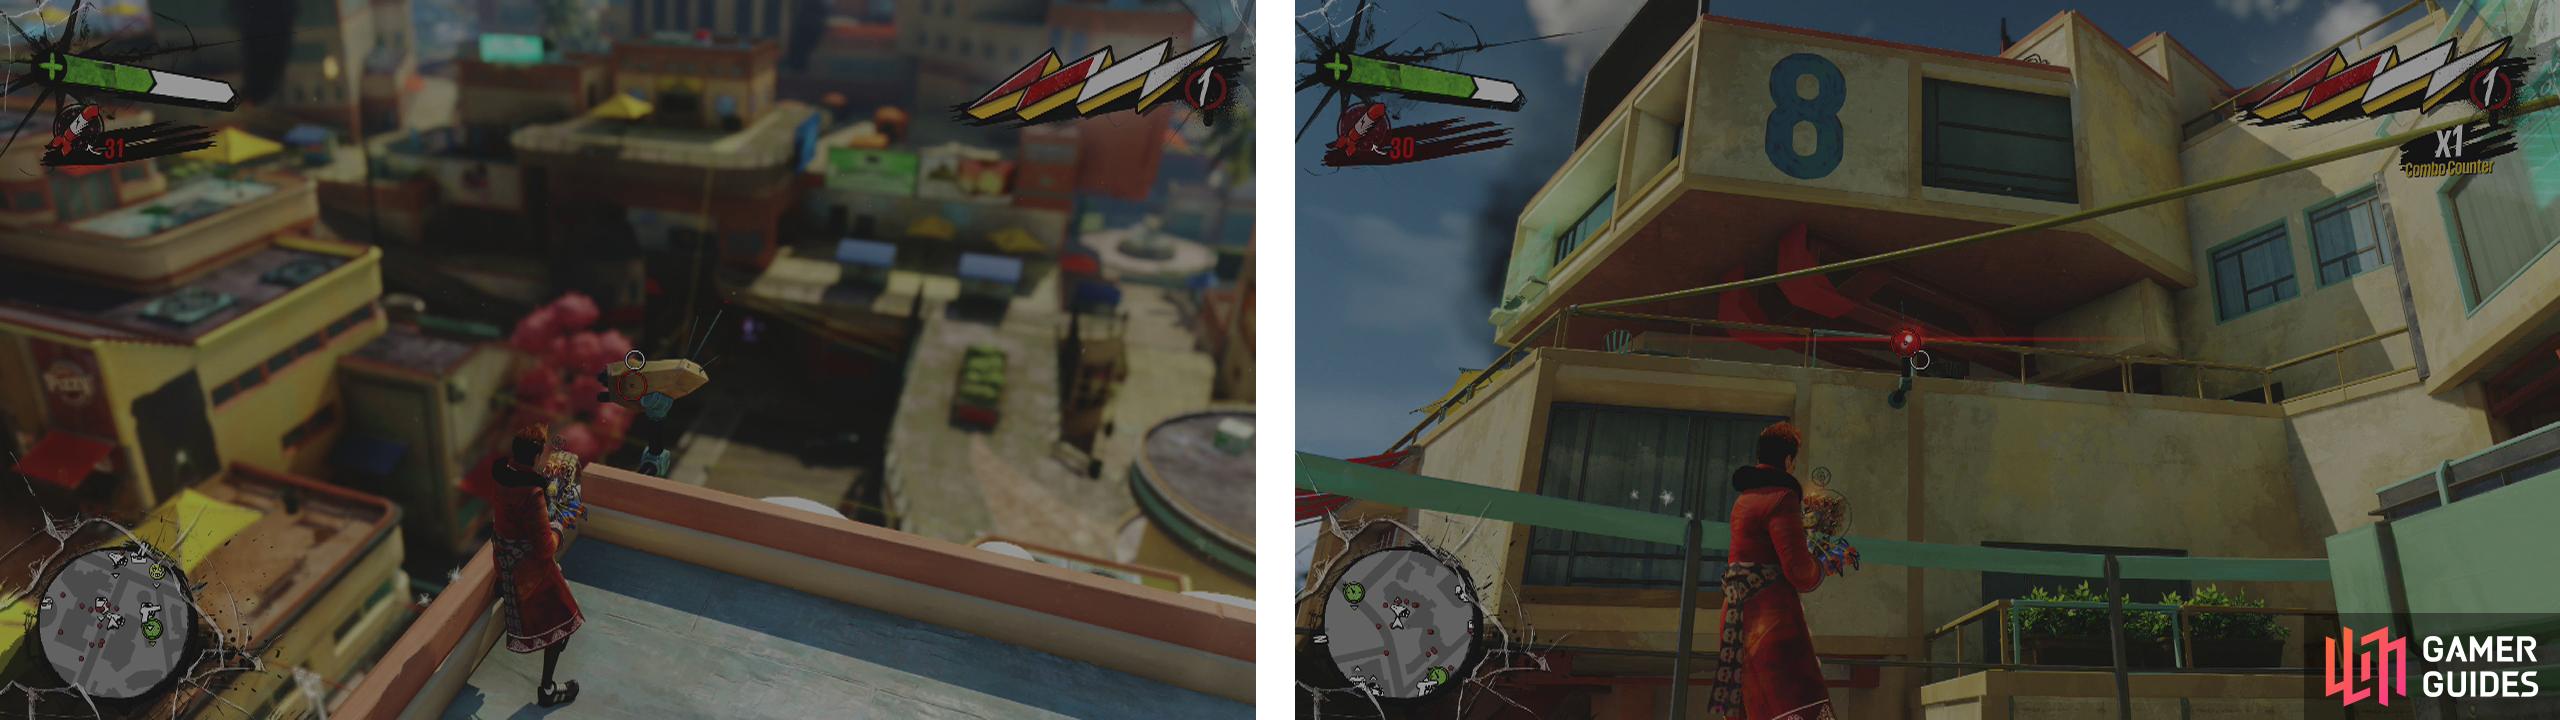 Cameras can be found on walls and the tops of buildings.